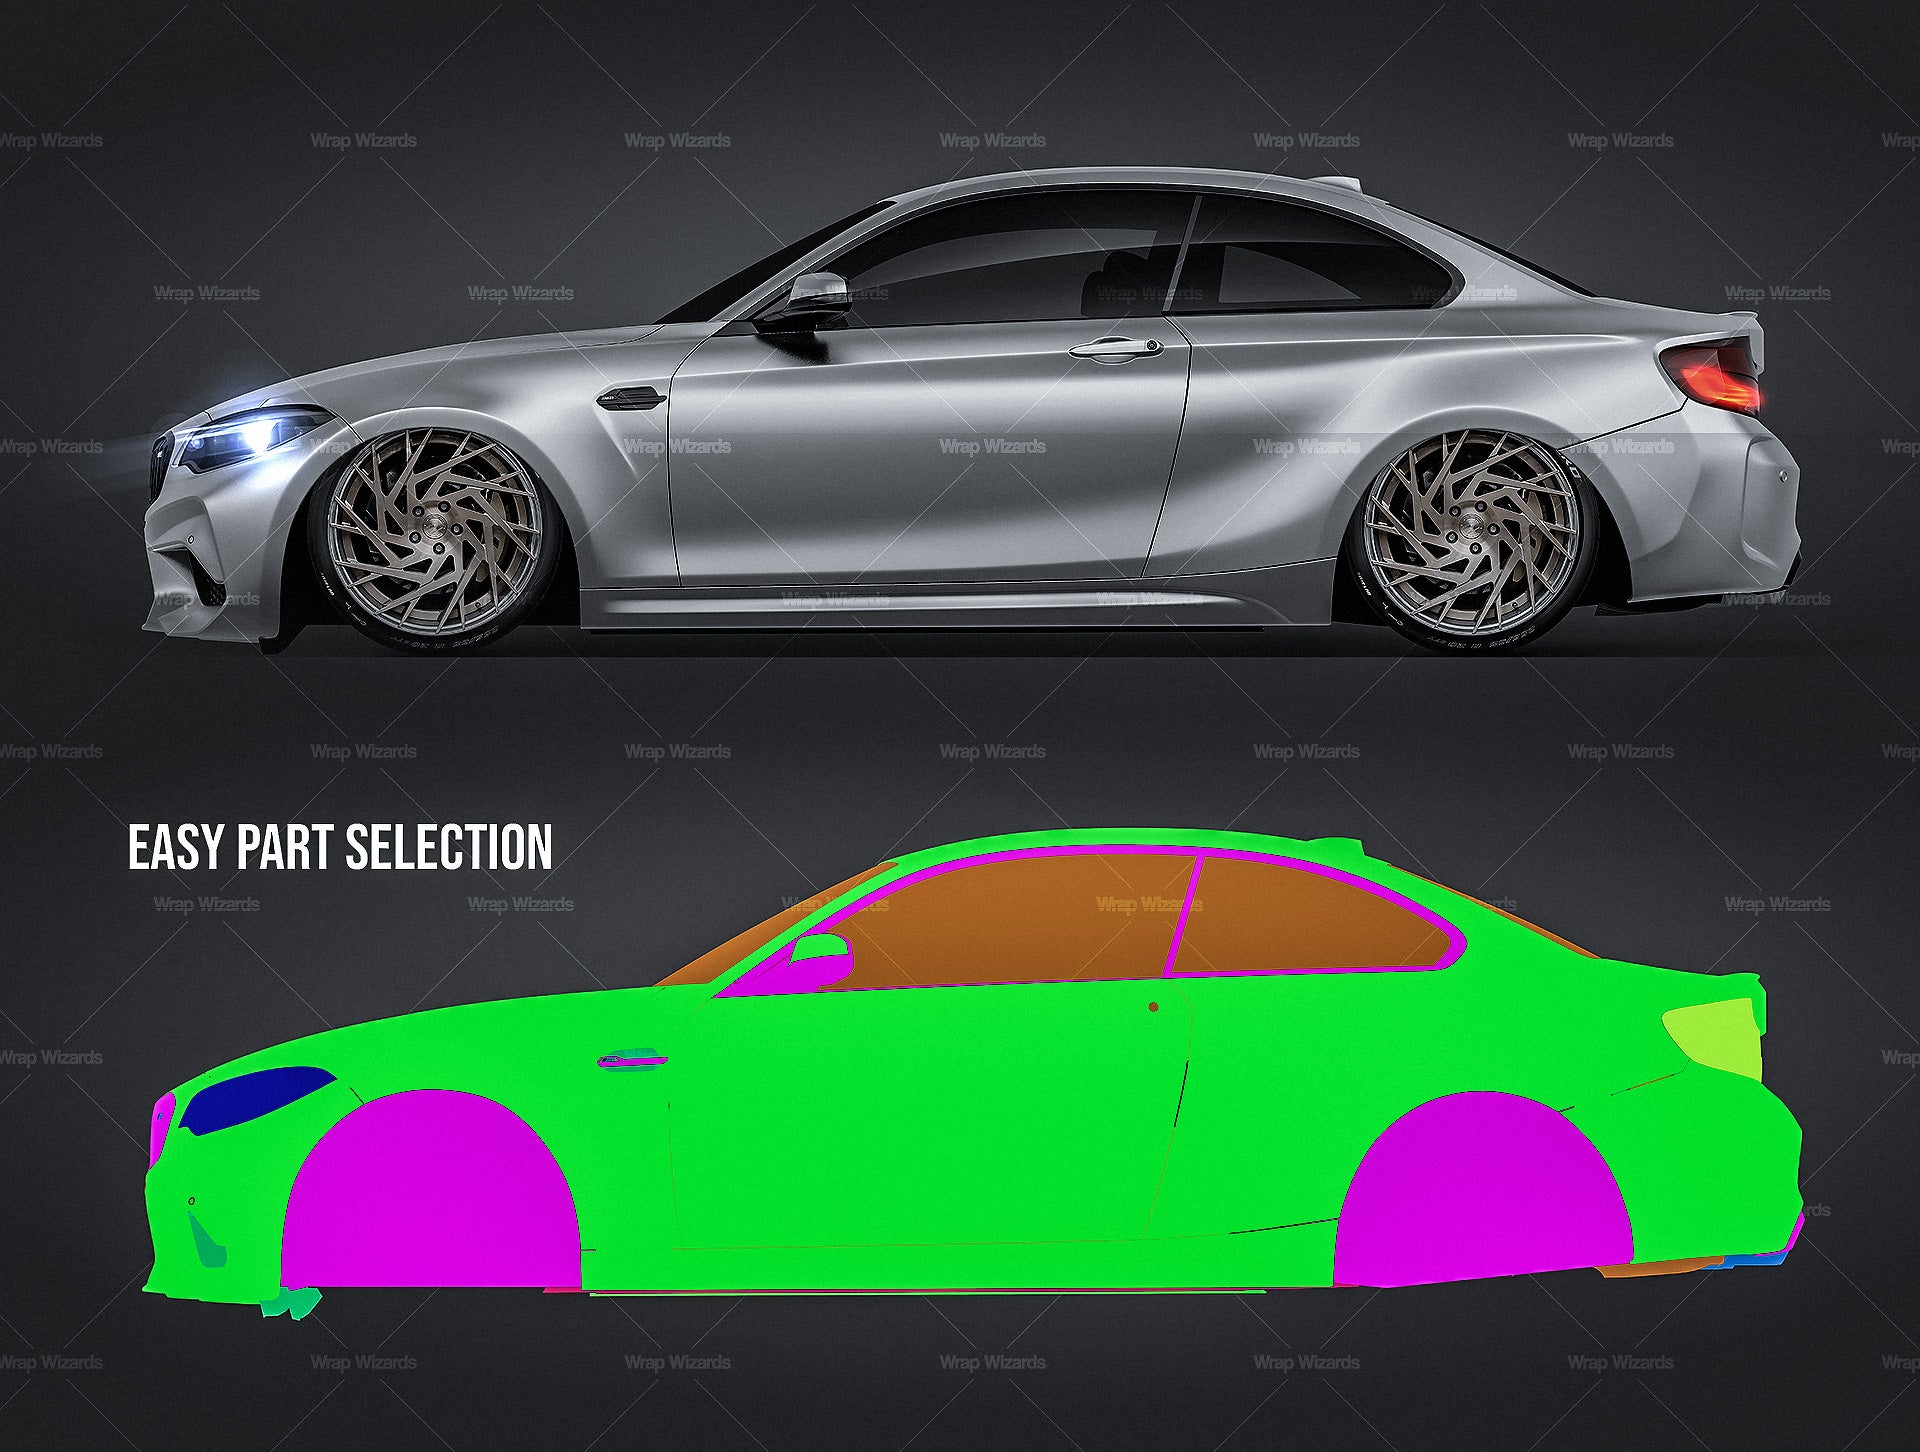 BMW M2 Competition 2019 glossy finish - all sides Mockup Template.psd